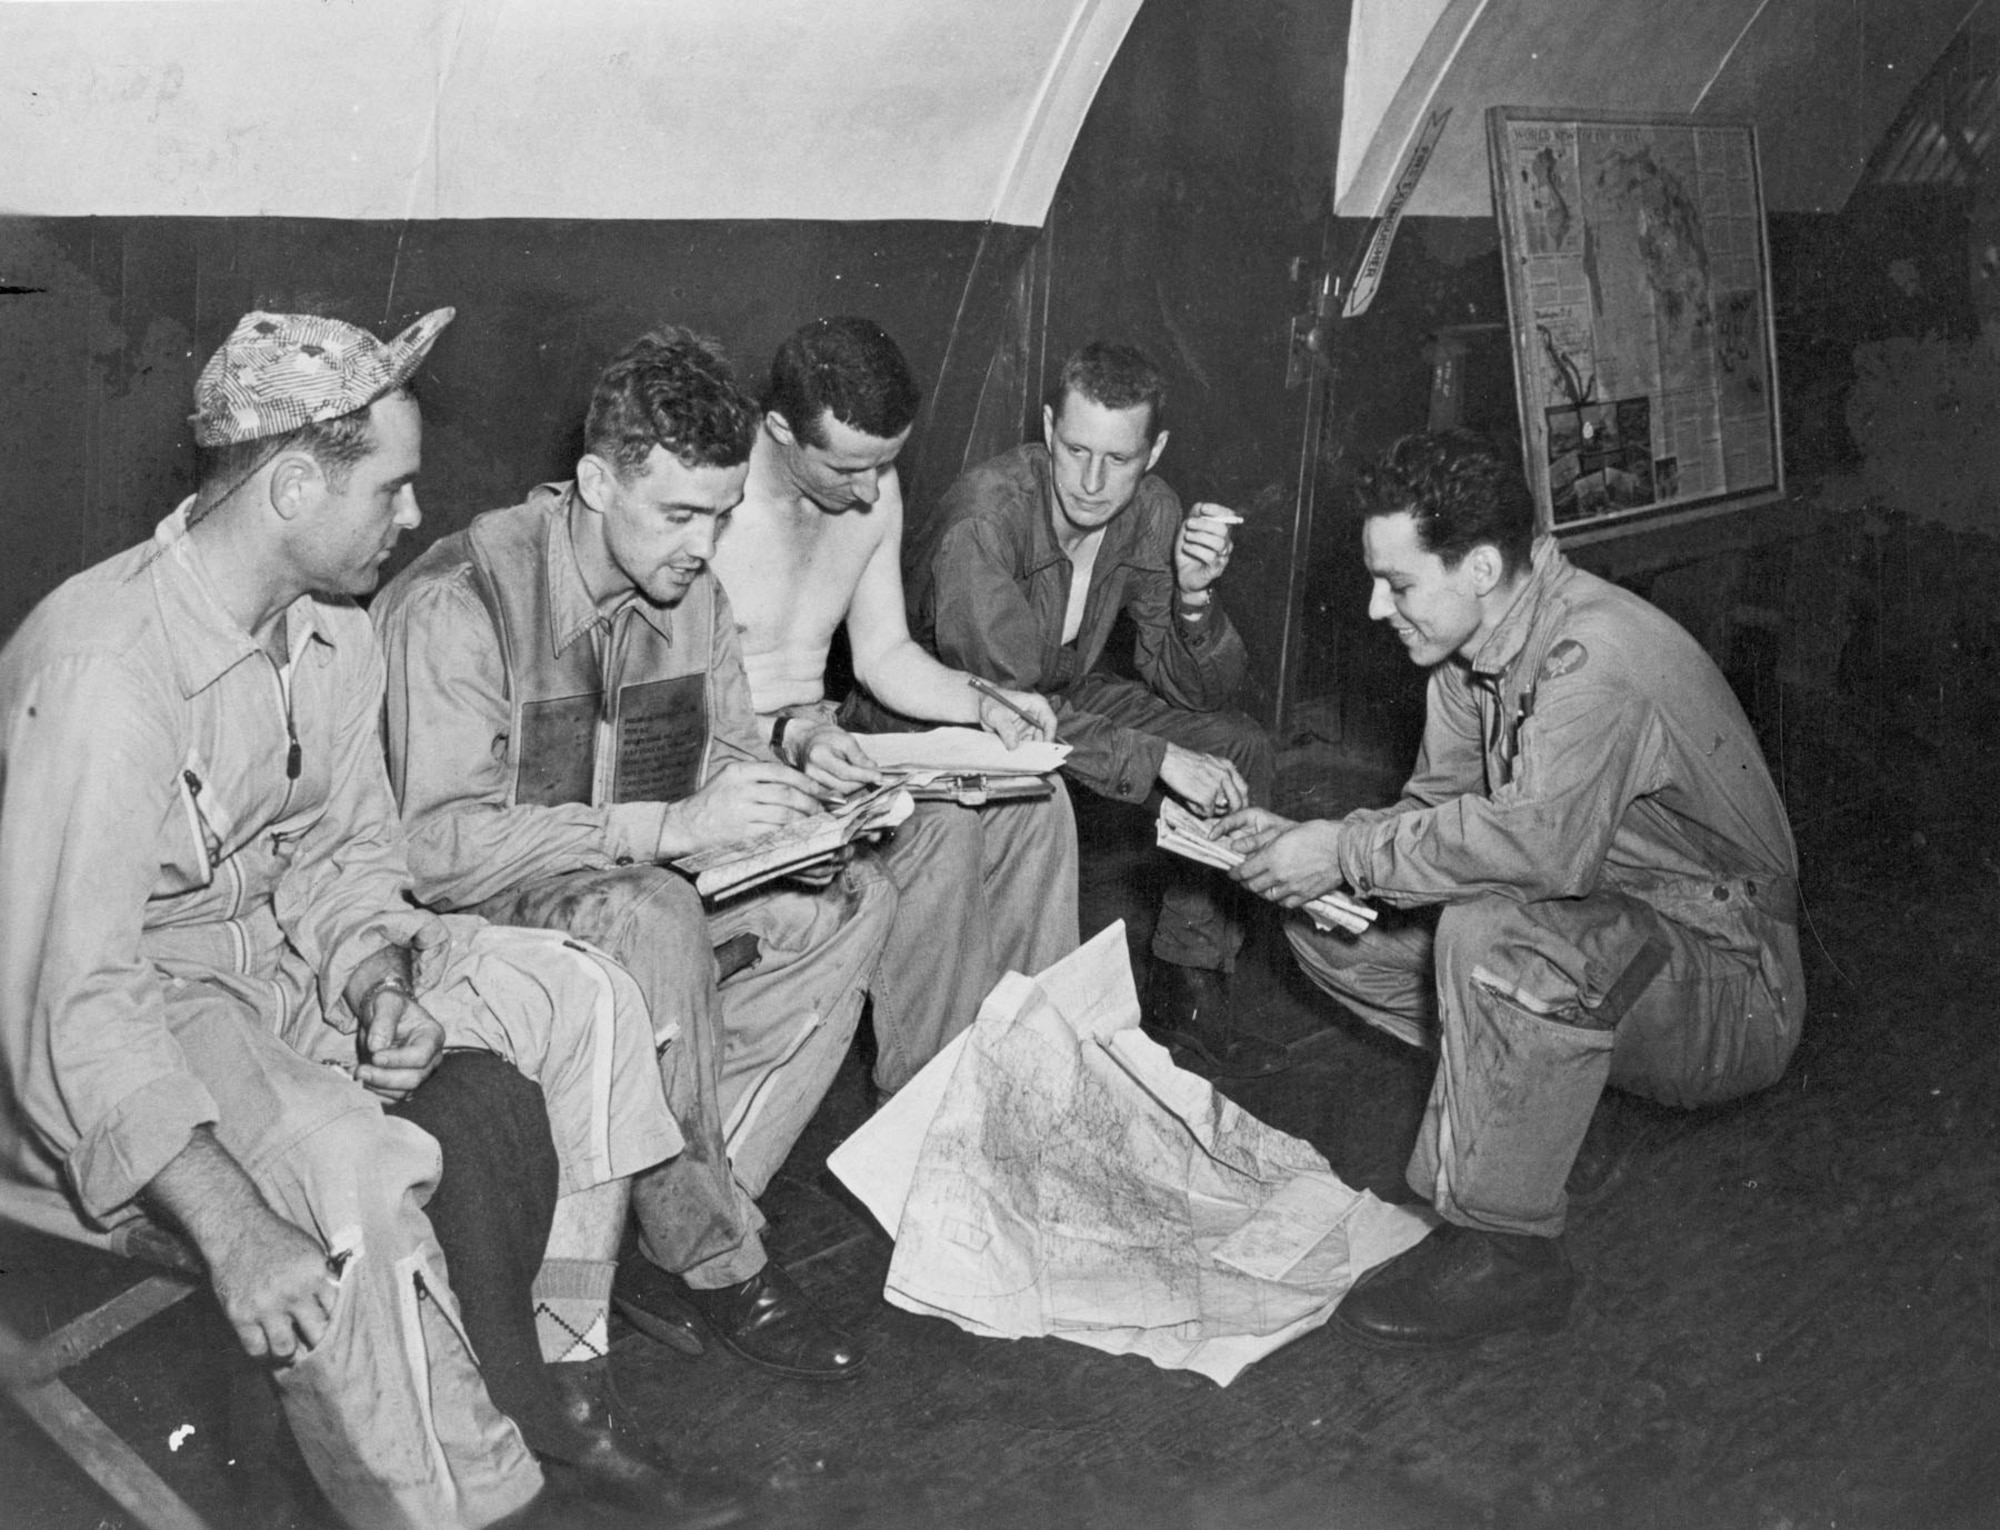 First on the left is Lt. Charles Moran. In the center is a sergeant writing out an intelligence report on the aerial battle. Second from the right is Lt. William Hudson.  Stooping is Lt. Carl Fraser, the radar operator who flew with Hudson. (U.S. Air Force photo)